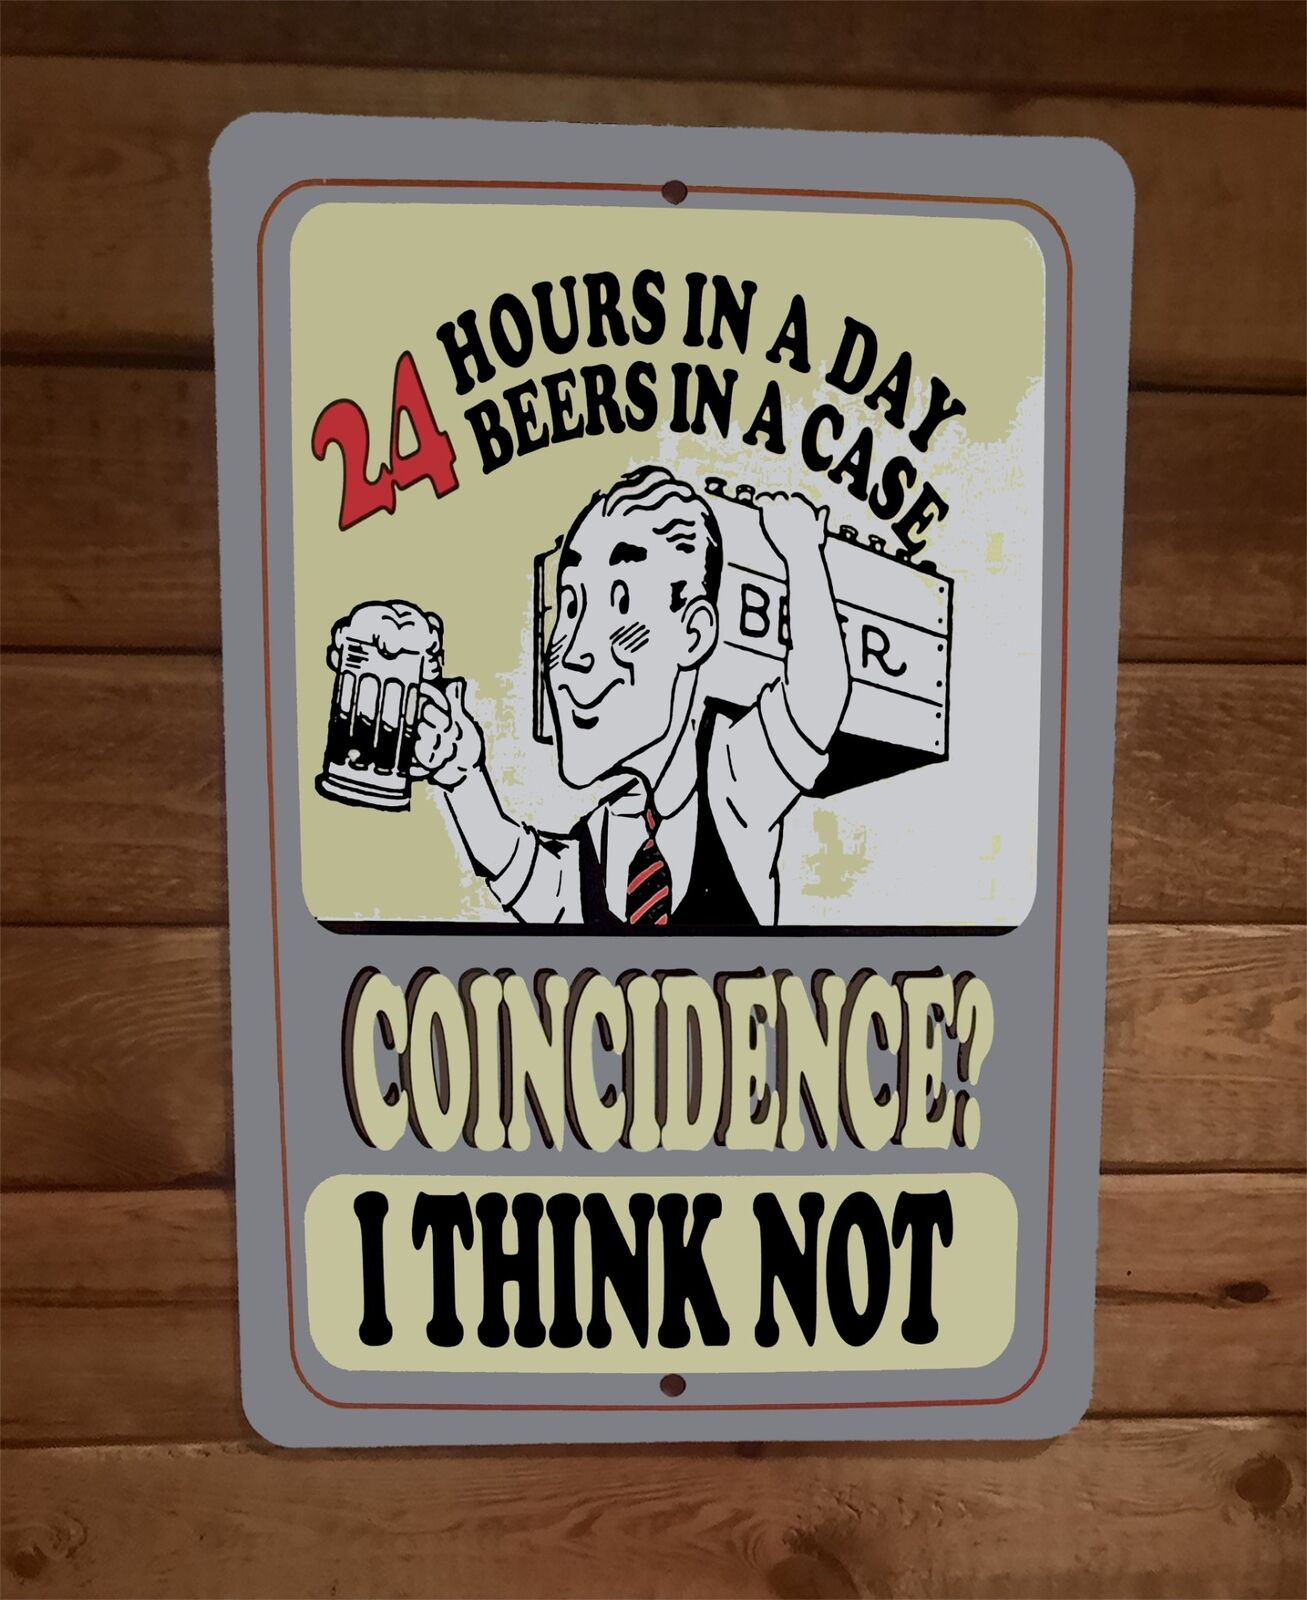 24 Hours in a Day Beers in a Case 8x12 Metal Wall Bar Sign